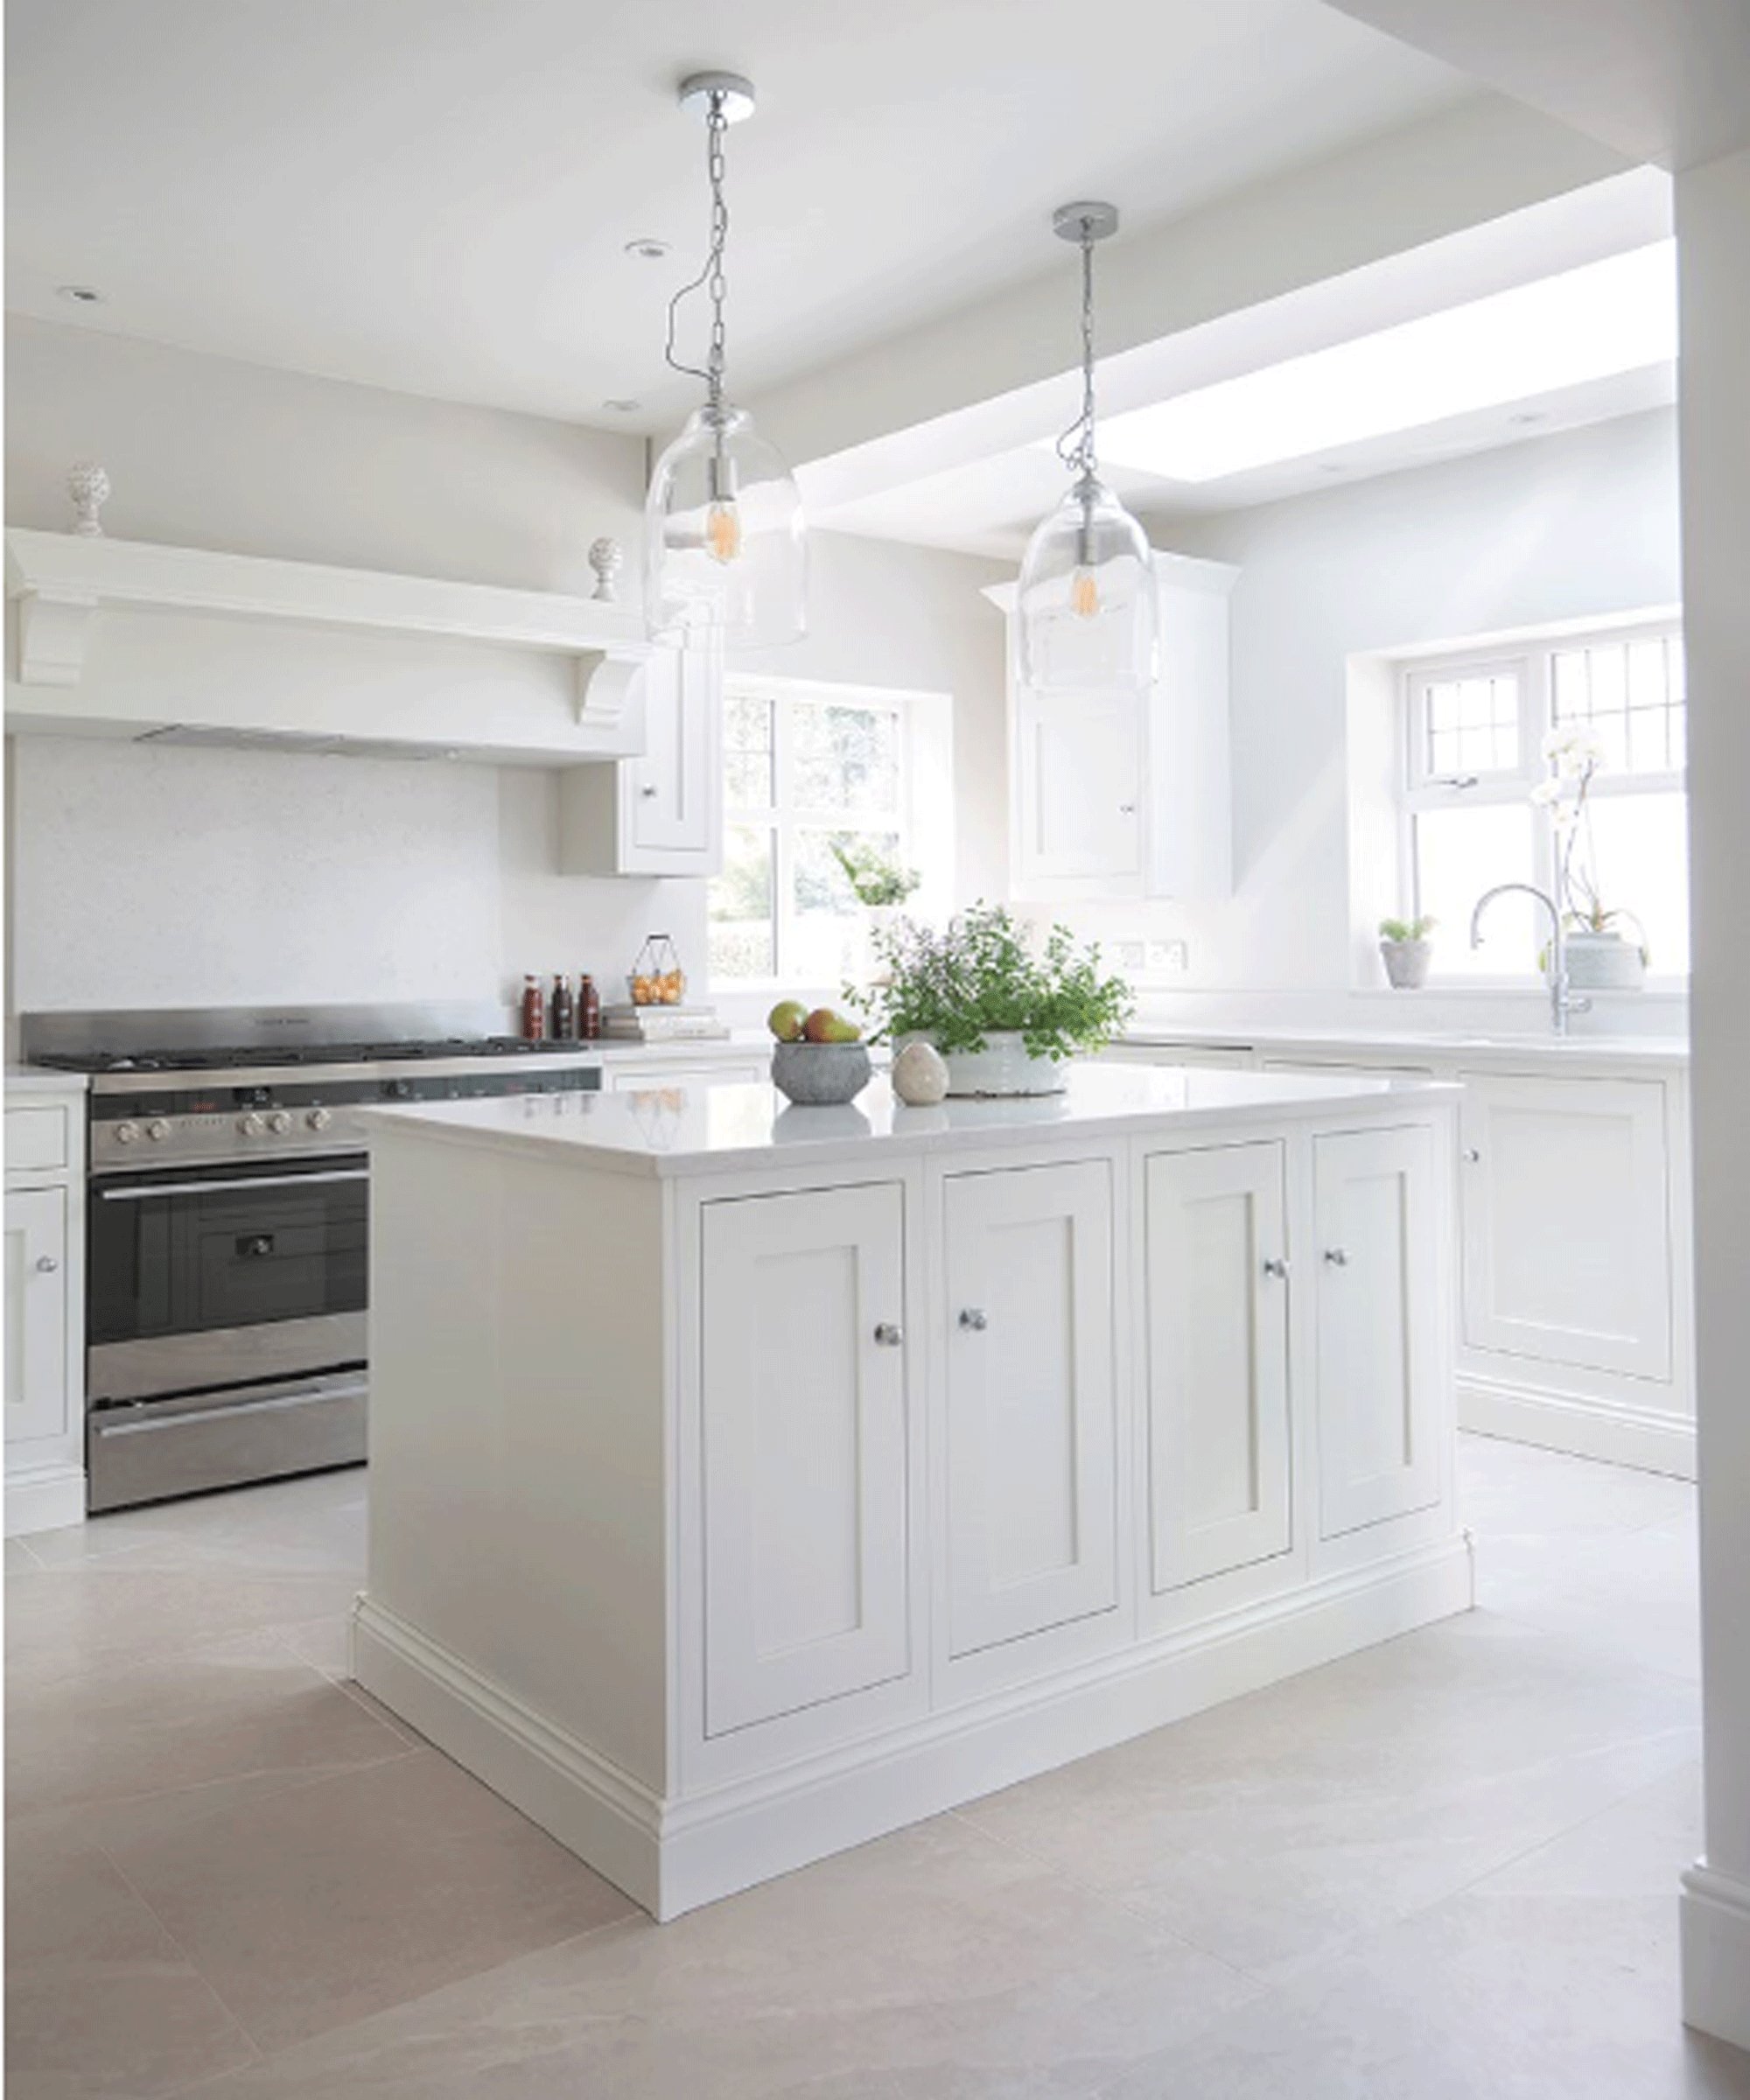 White kitchen with white walls and a large window